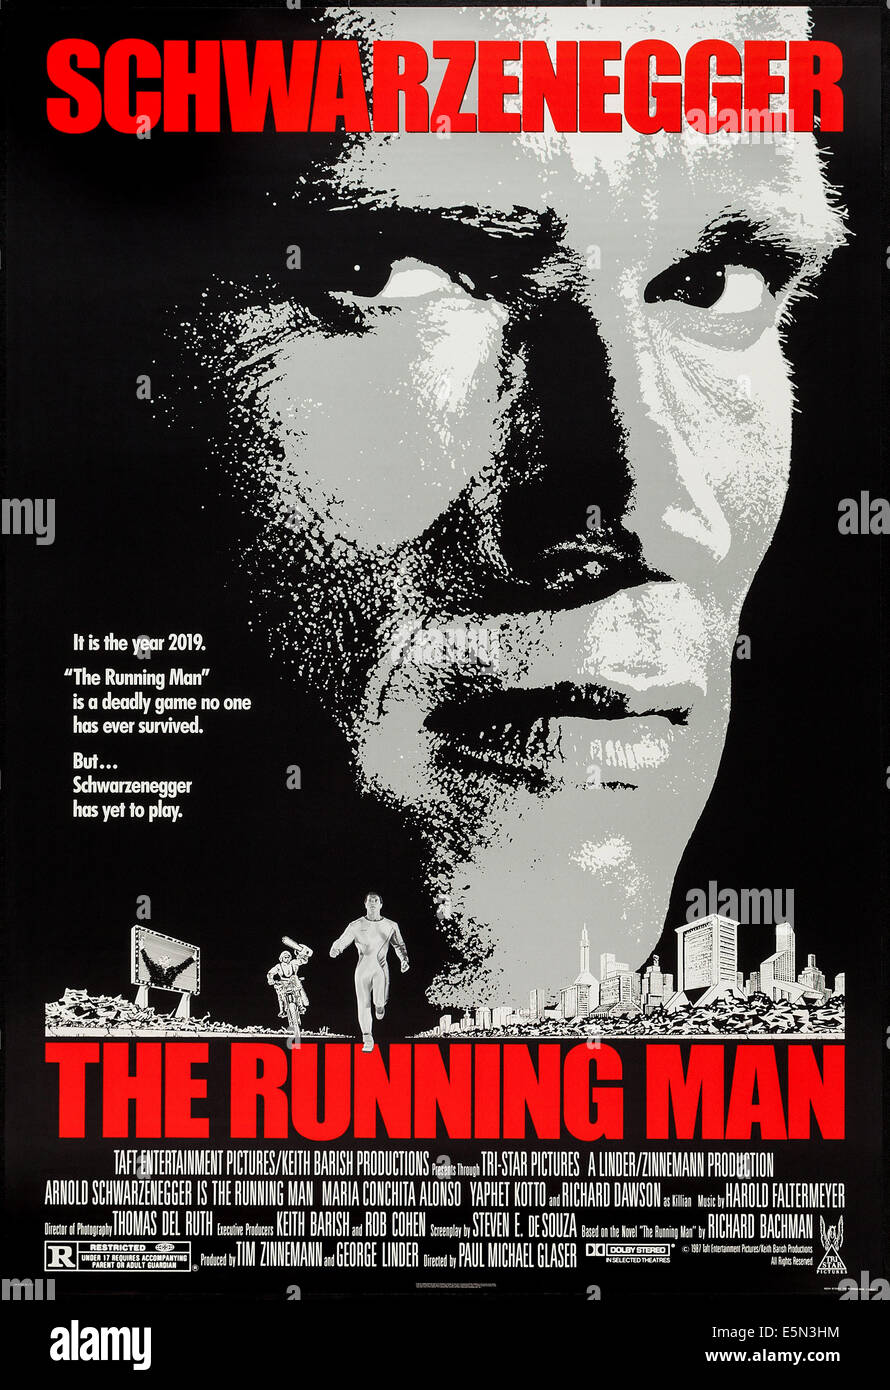 THE RUNNING MAN, Arnold Schwarzenegger, 1987, ©TriStar Pictures/courtesy Everett Collection Stock Photo